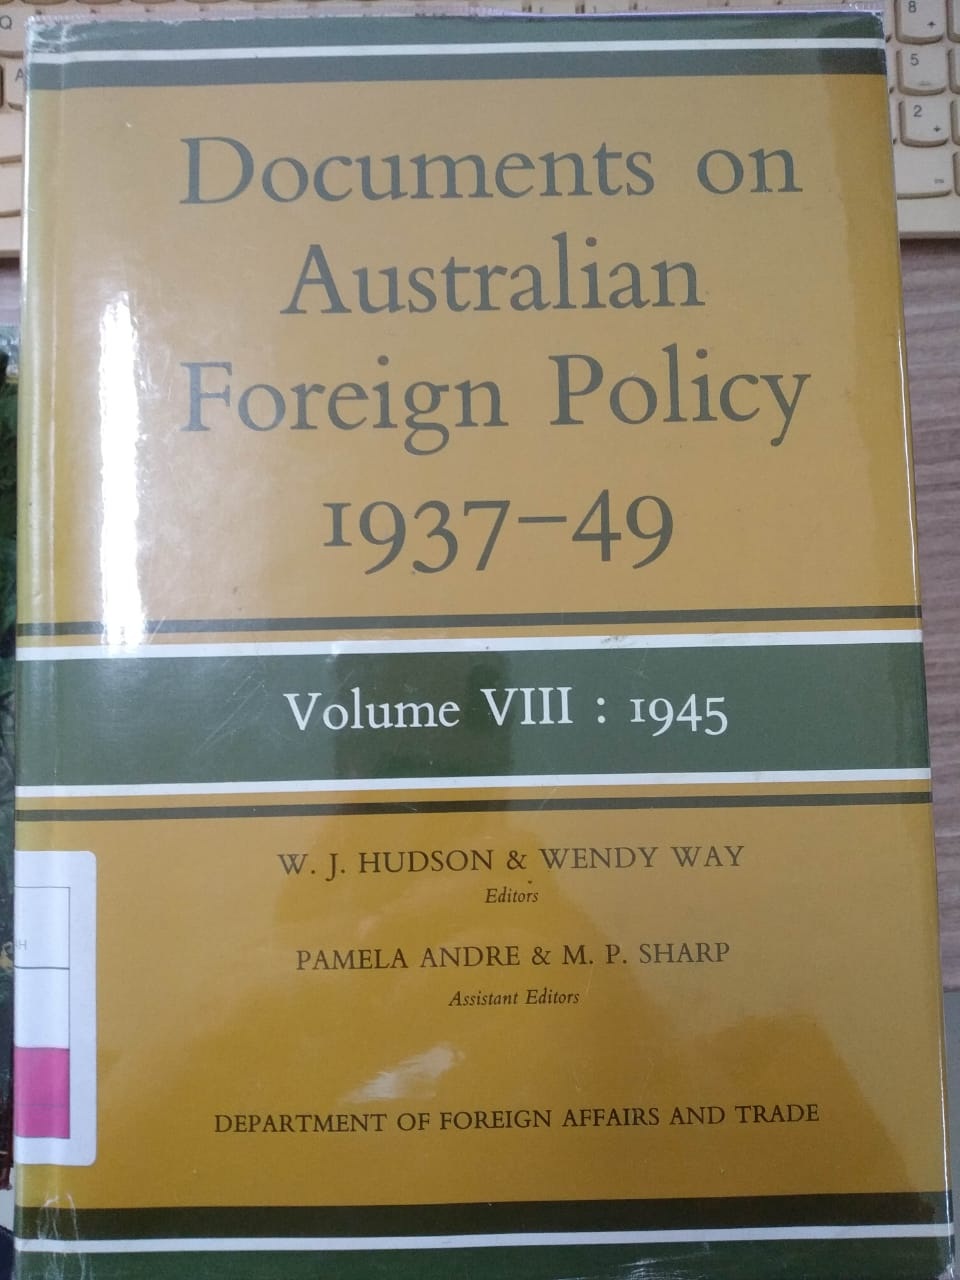 Documents on Australian Foreign Policy 1937-49. Volume VIII : 1945